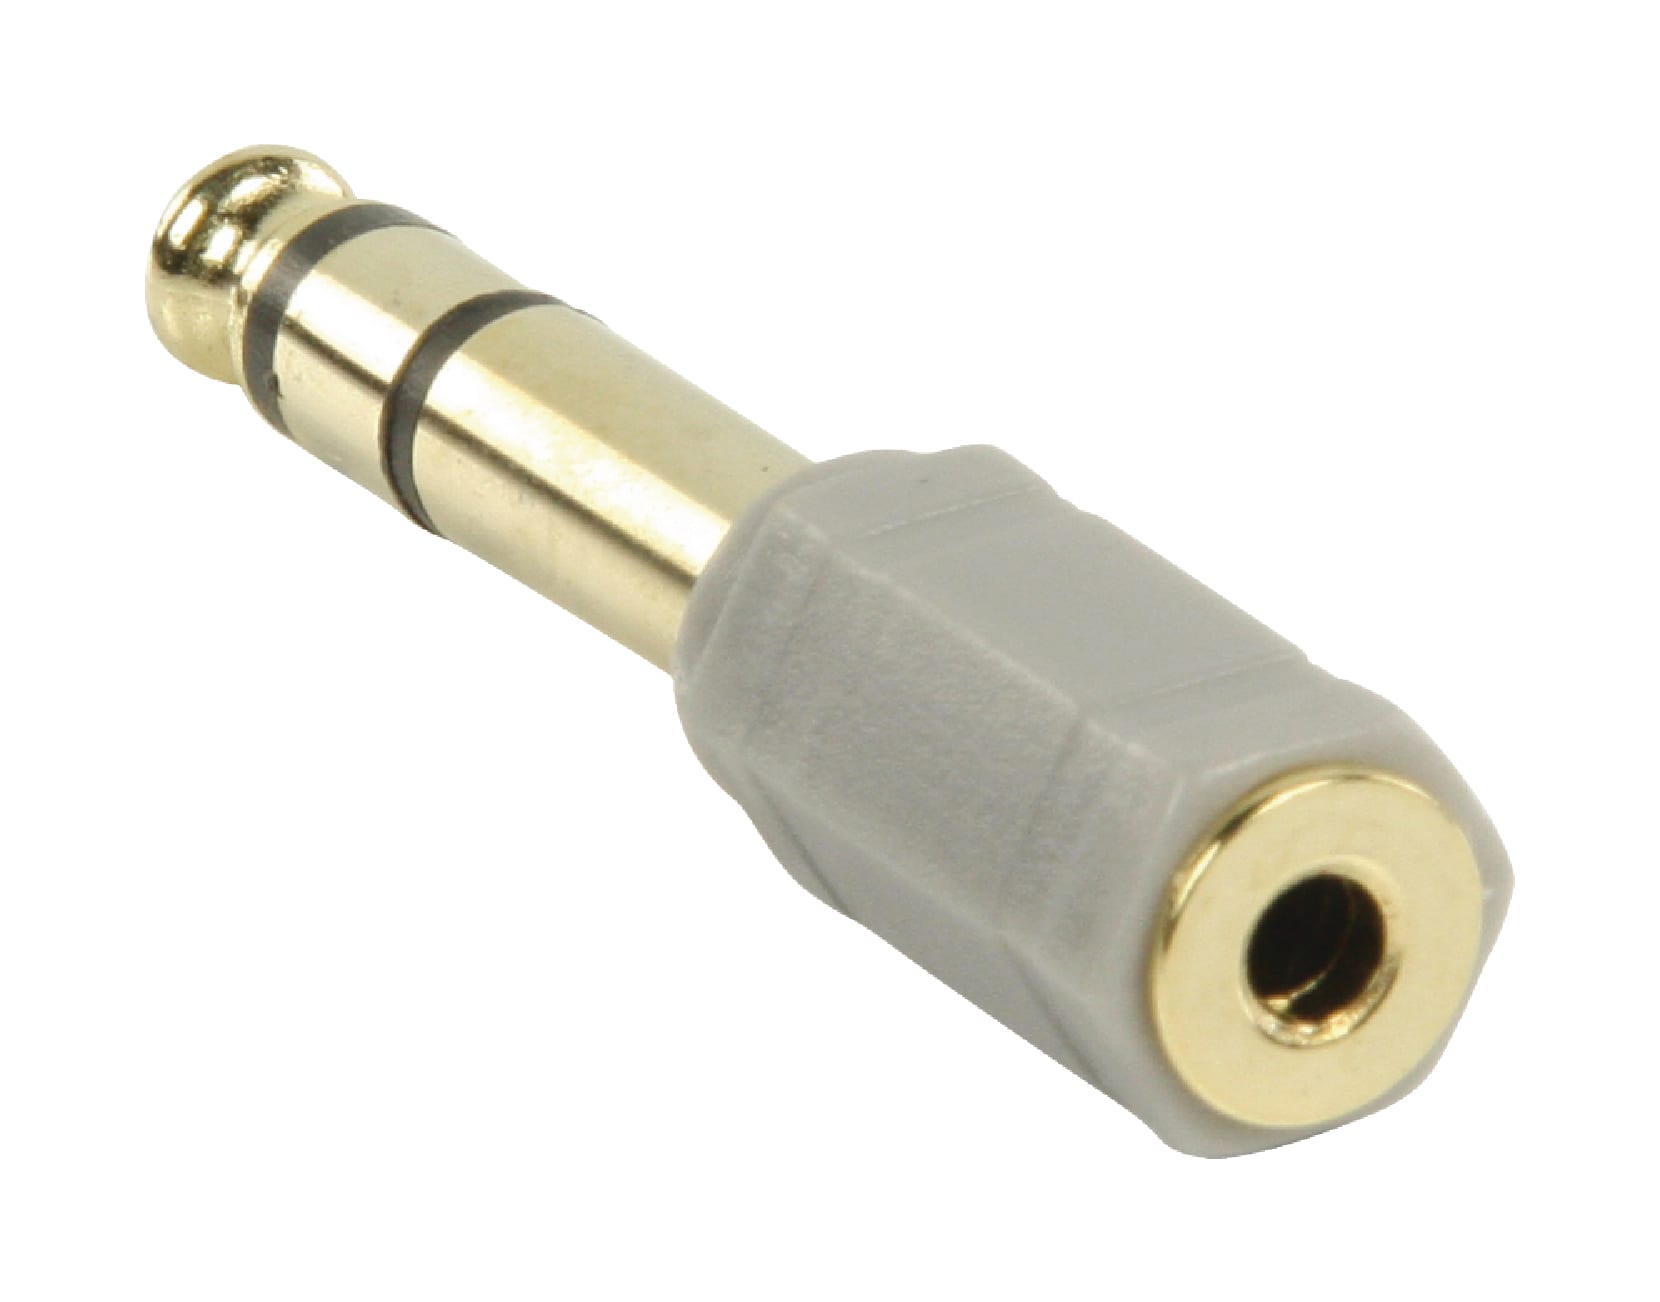 HQ Adapter 6.3mm male to 3.5mm female gold - Koptelefoon kabel